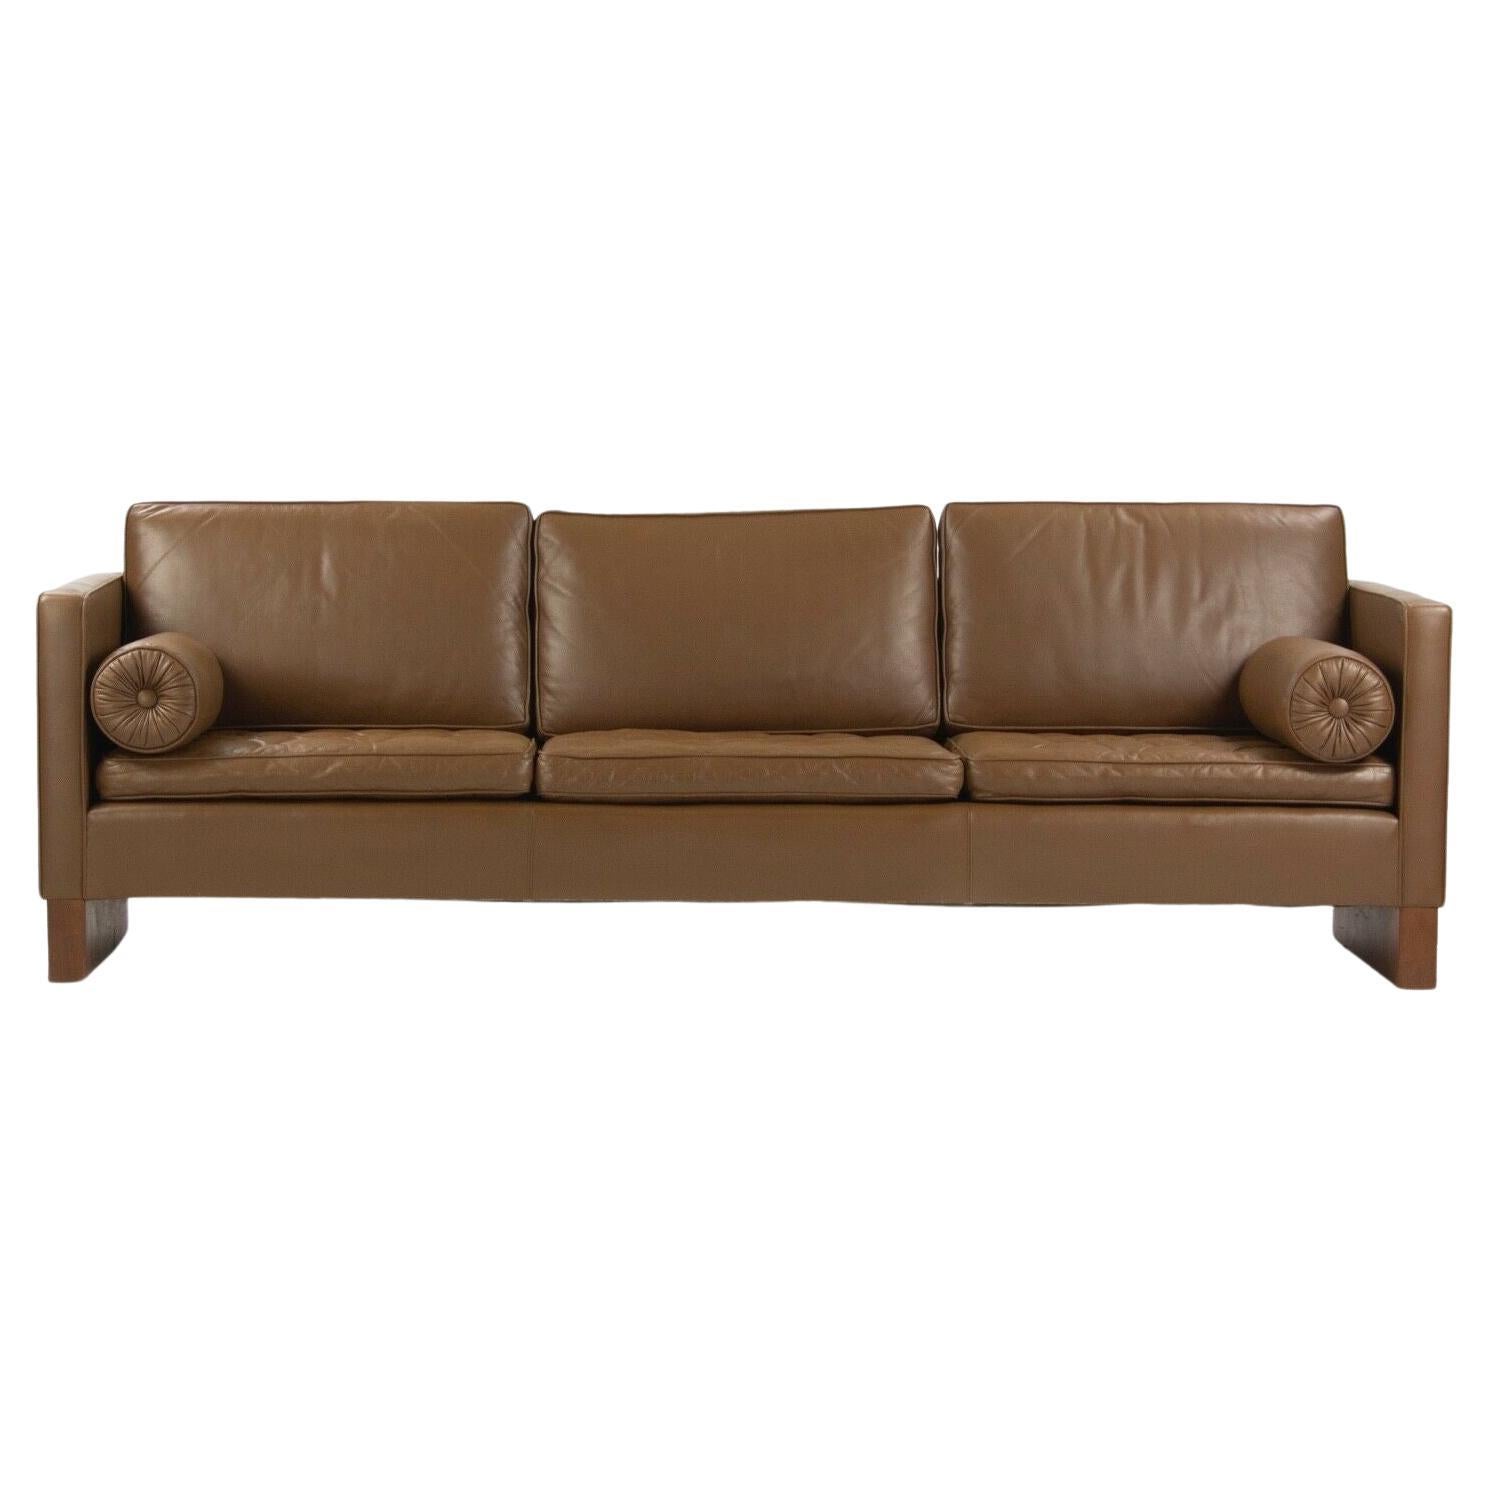 1960s Mies Van Der Rohe for Knoll International Brown Leather Three Seat Sofa For Sale